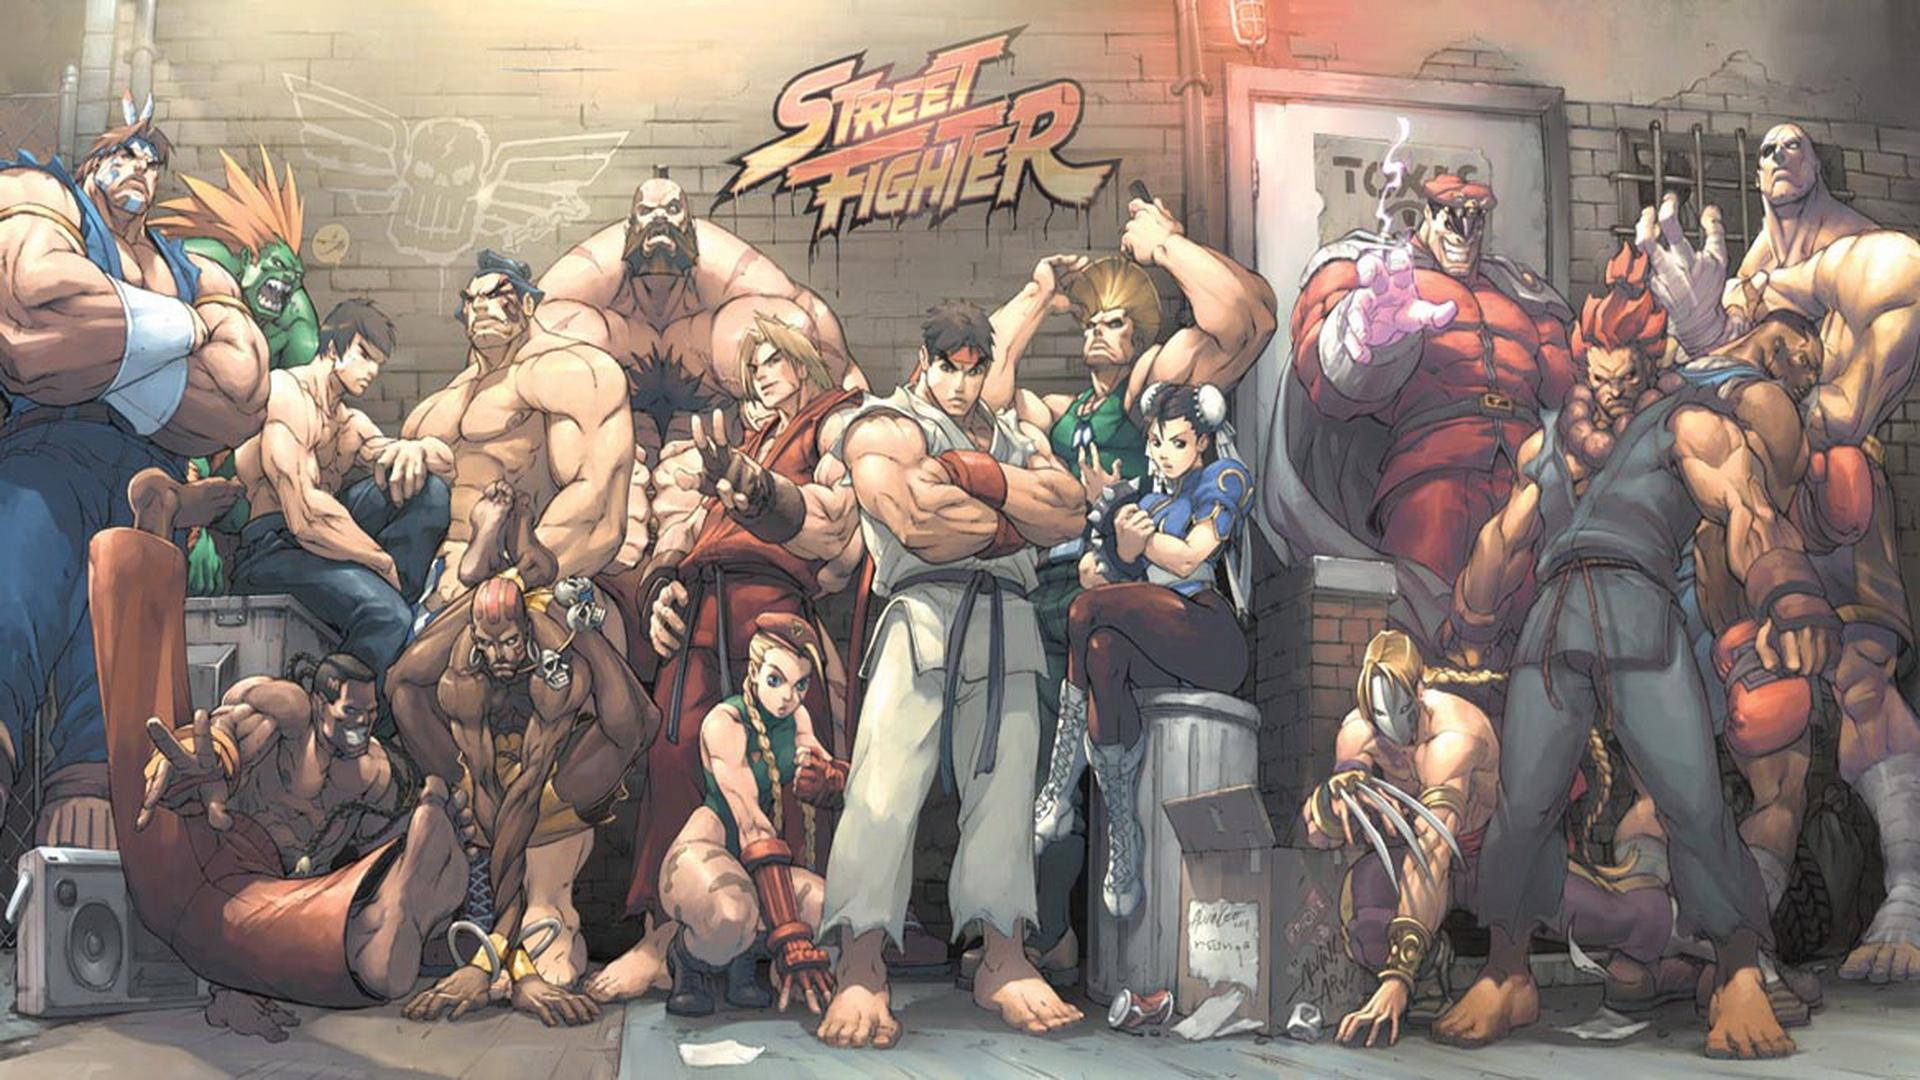 Street Fighter On A Brick Wall